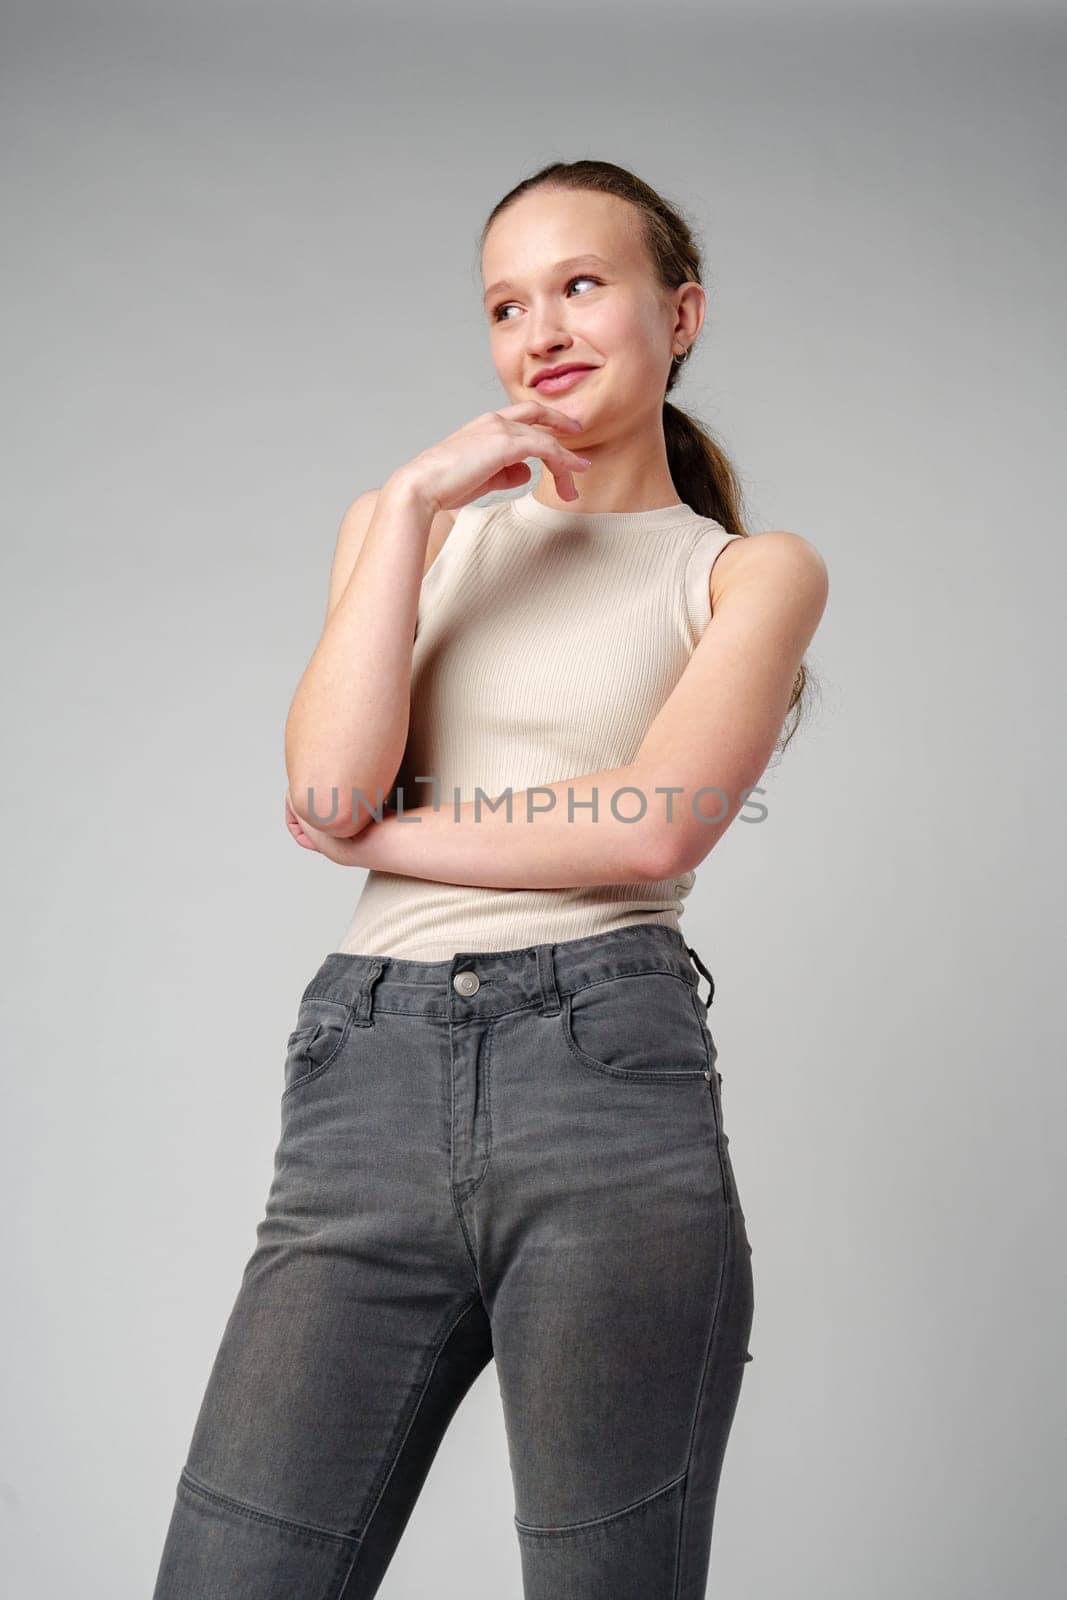 Girl in Beige Tank Top and Grey Jeans on gray background in studio